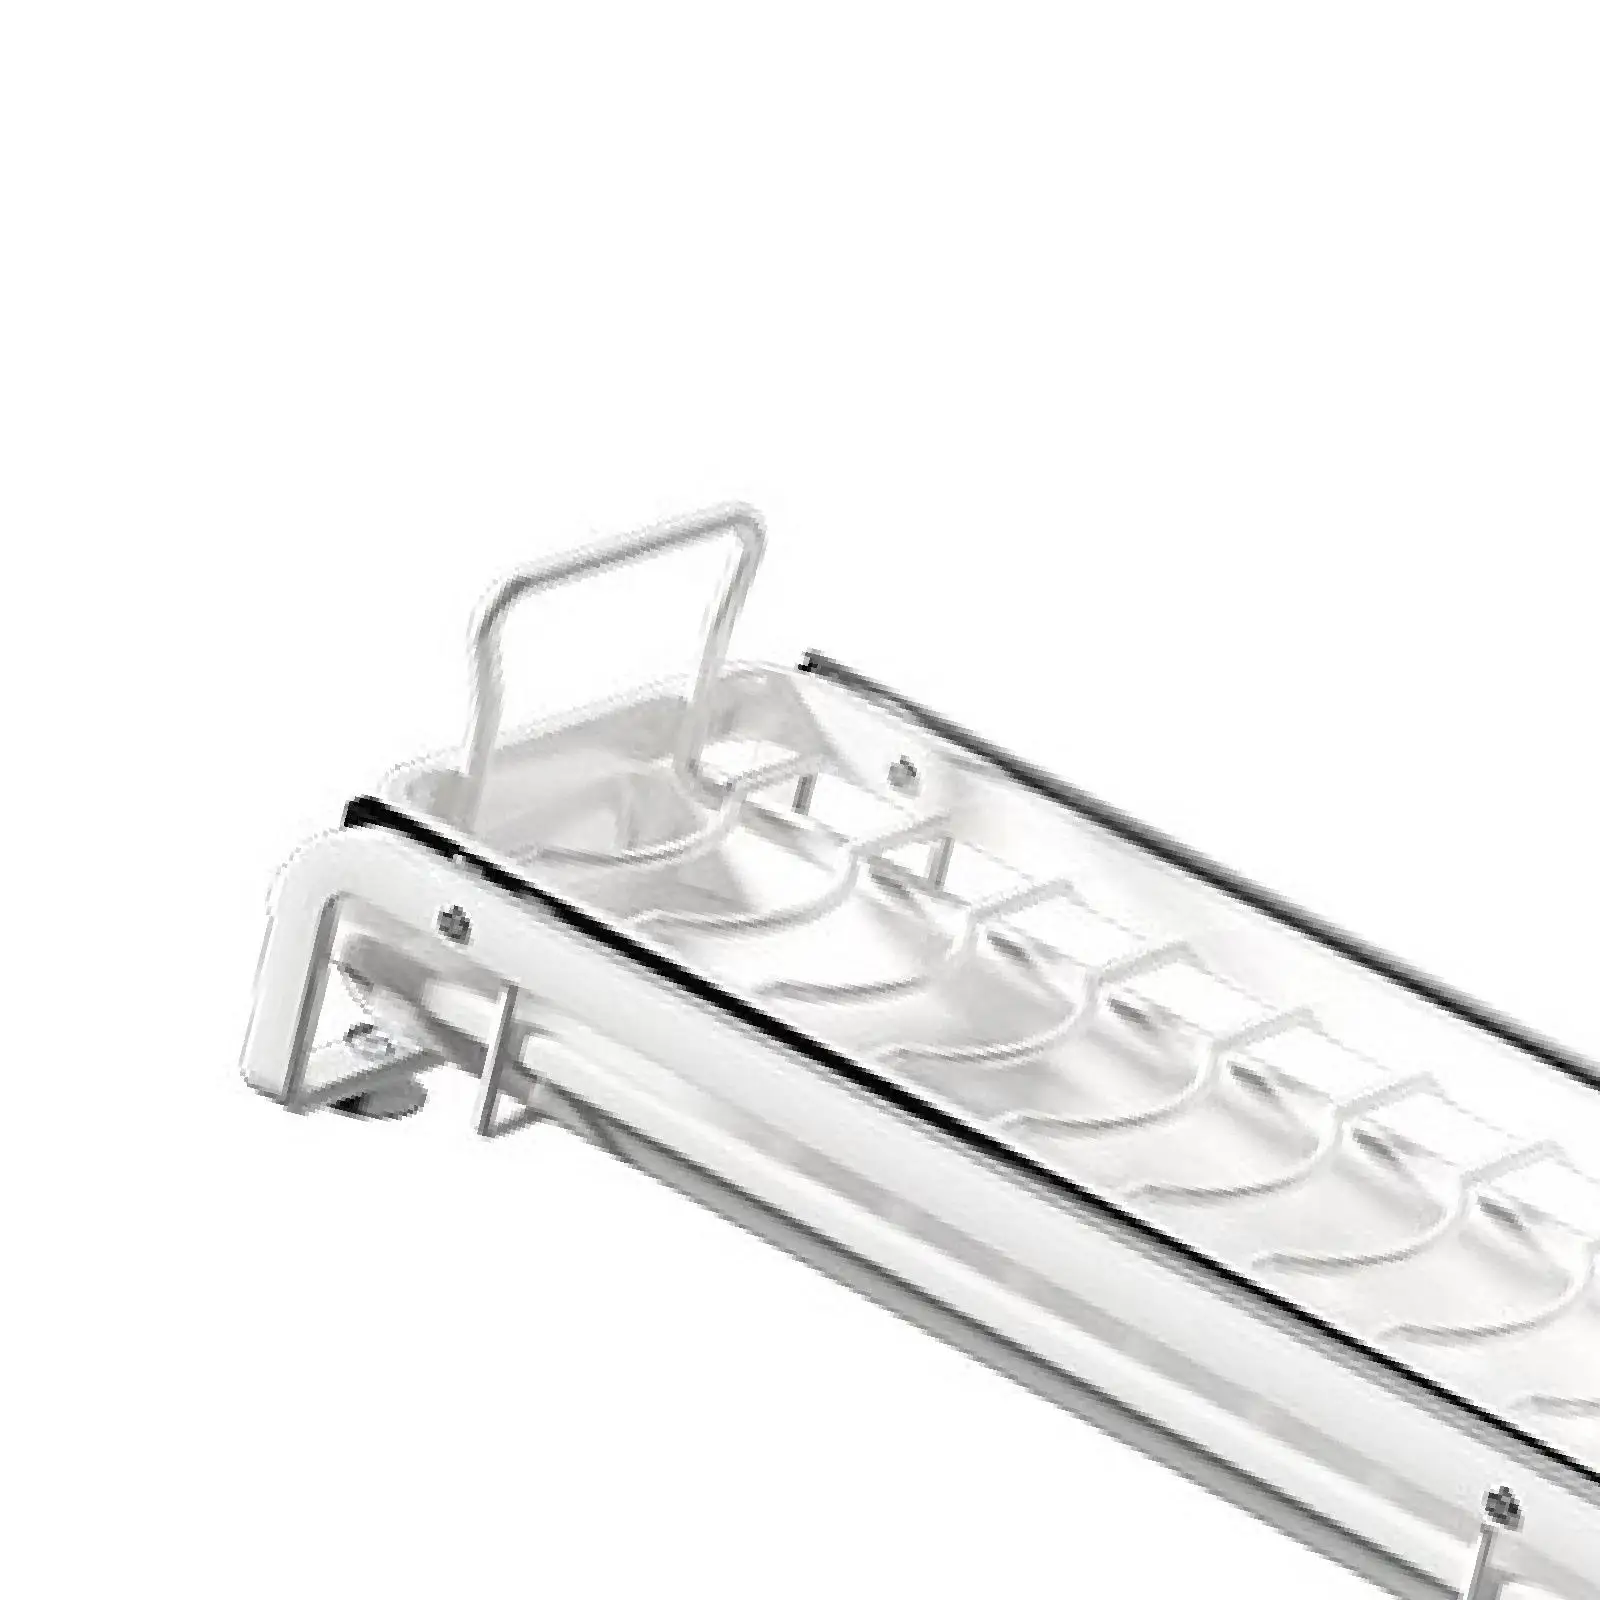 Slide Out Dish Drying Rack Space Saving Dish Drainer Rack with Drain Tray for Cupboard Cabinet Counter Countertop Kitchen